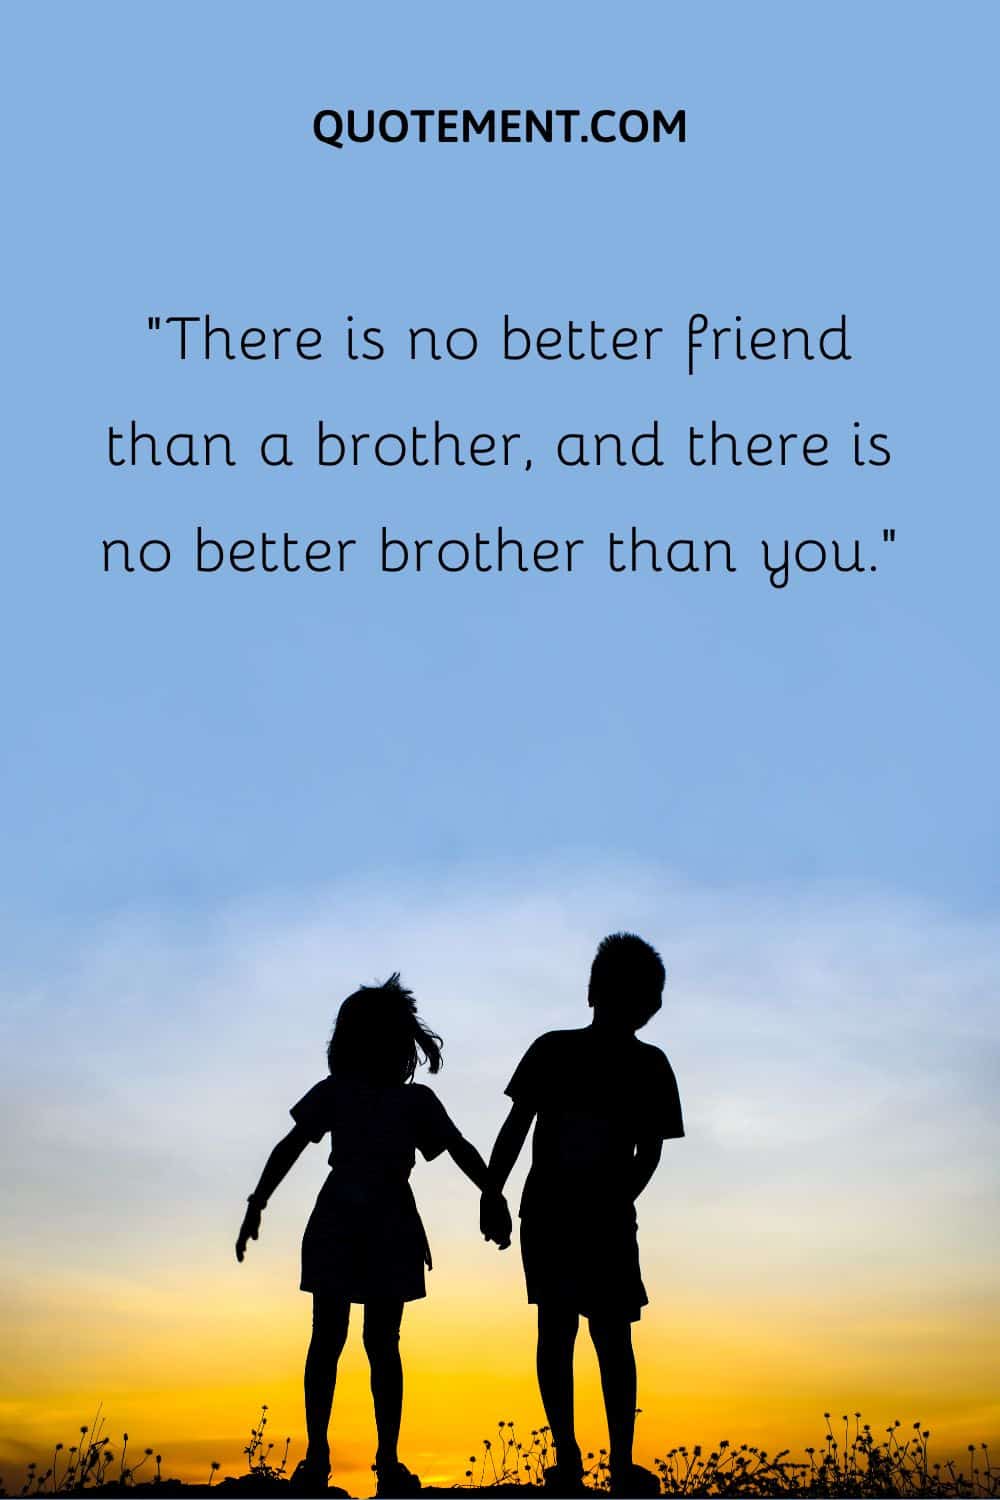 “There is no better friend than a brother, and there is no better brother than you.”